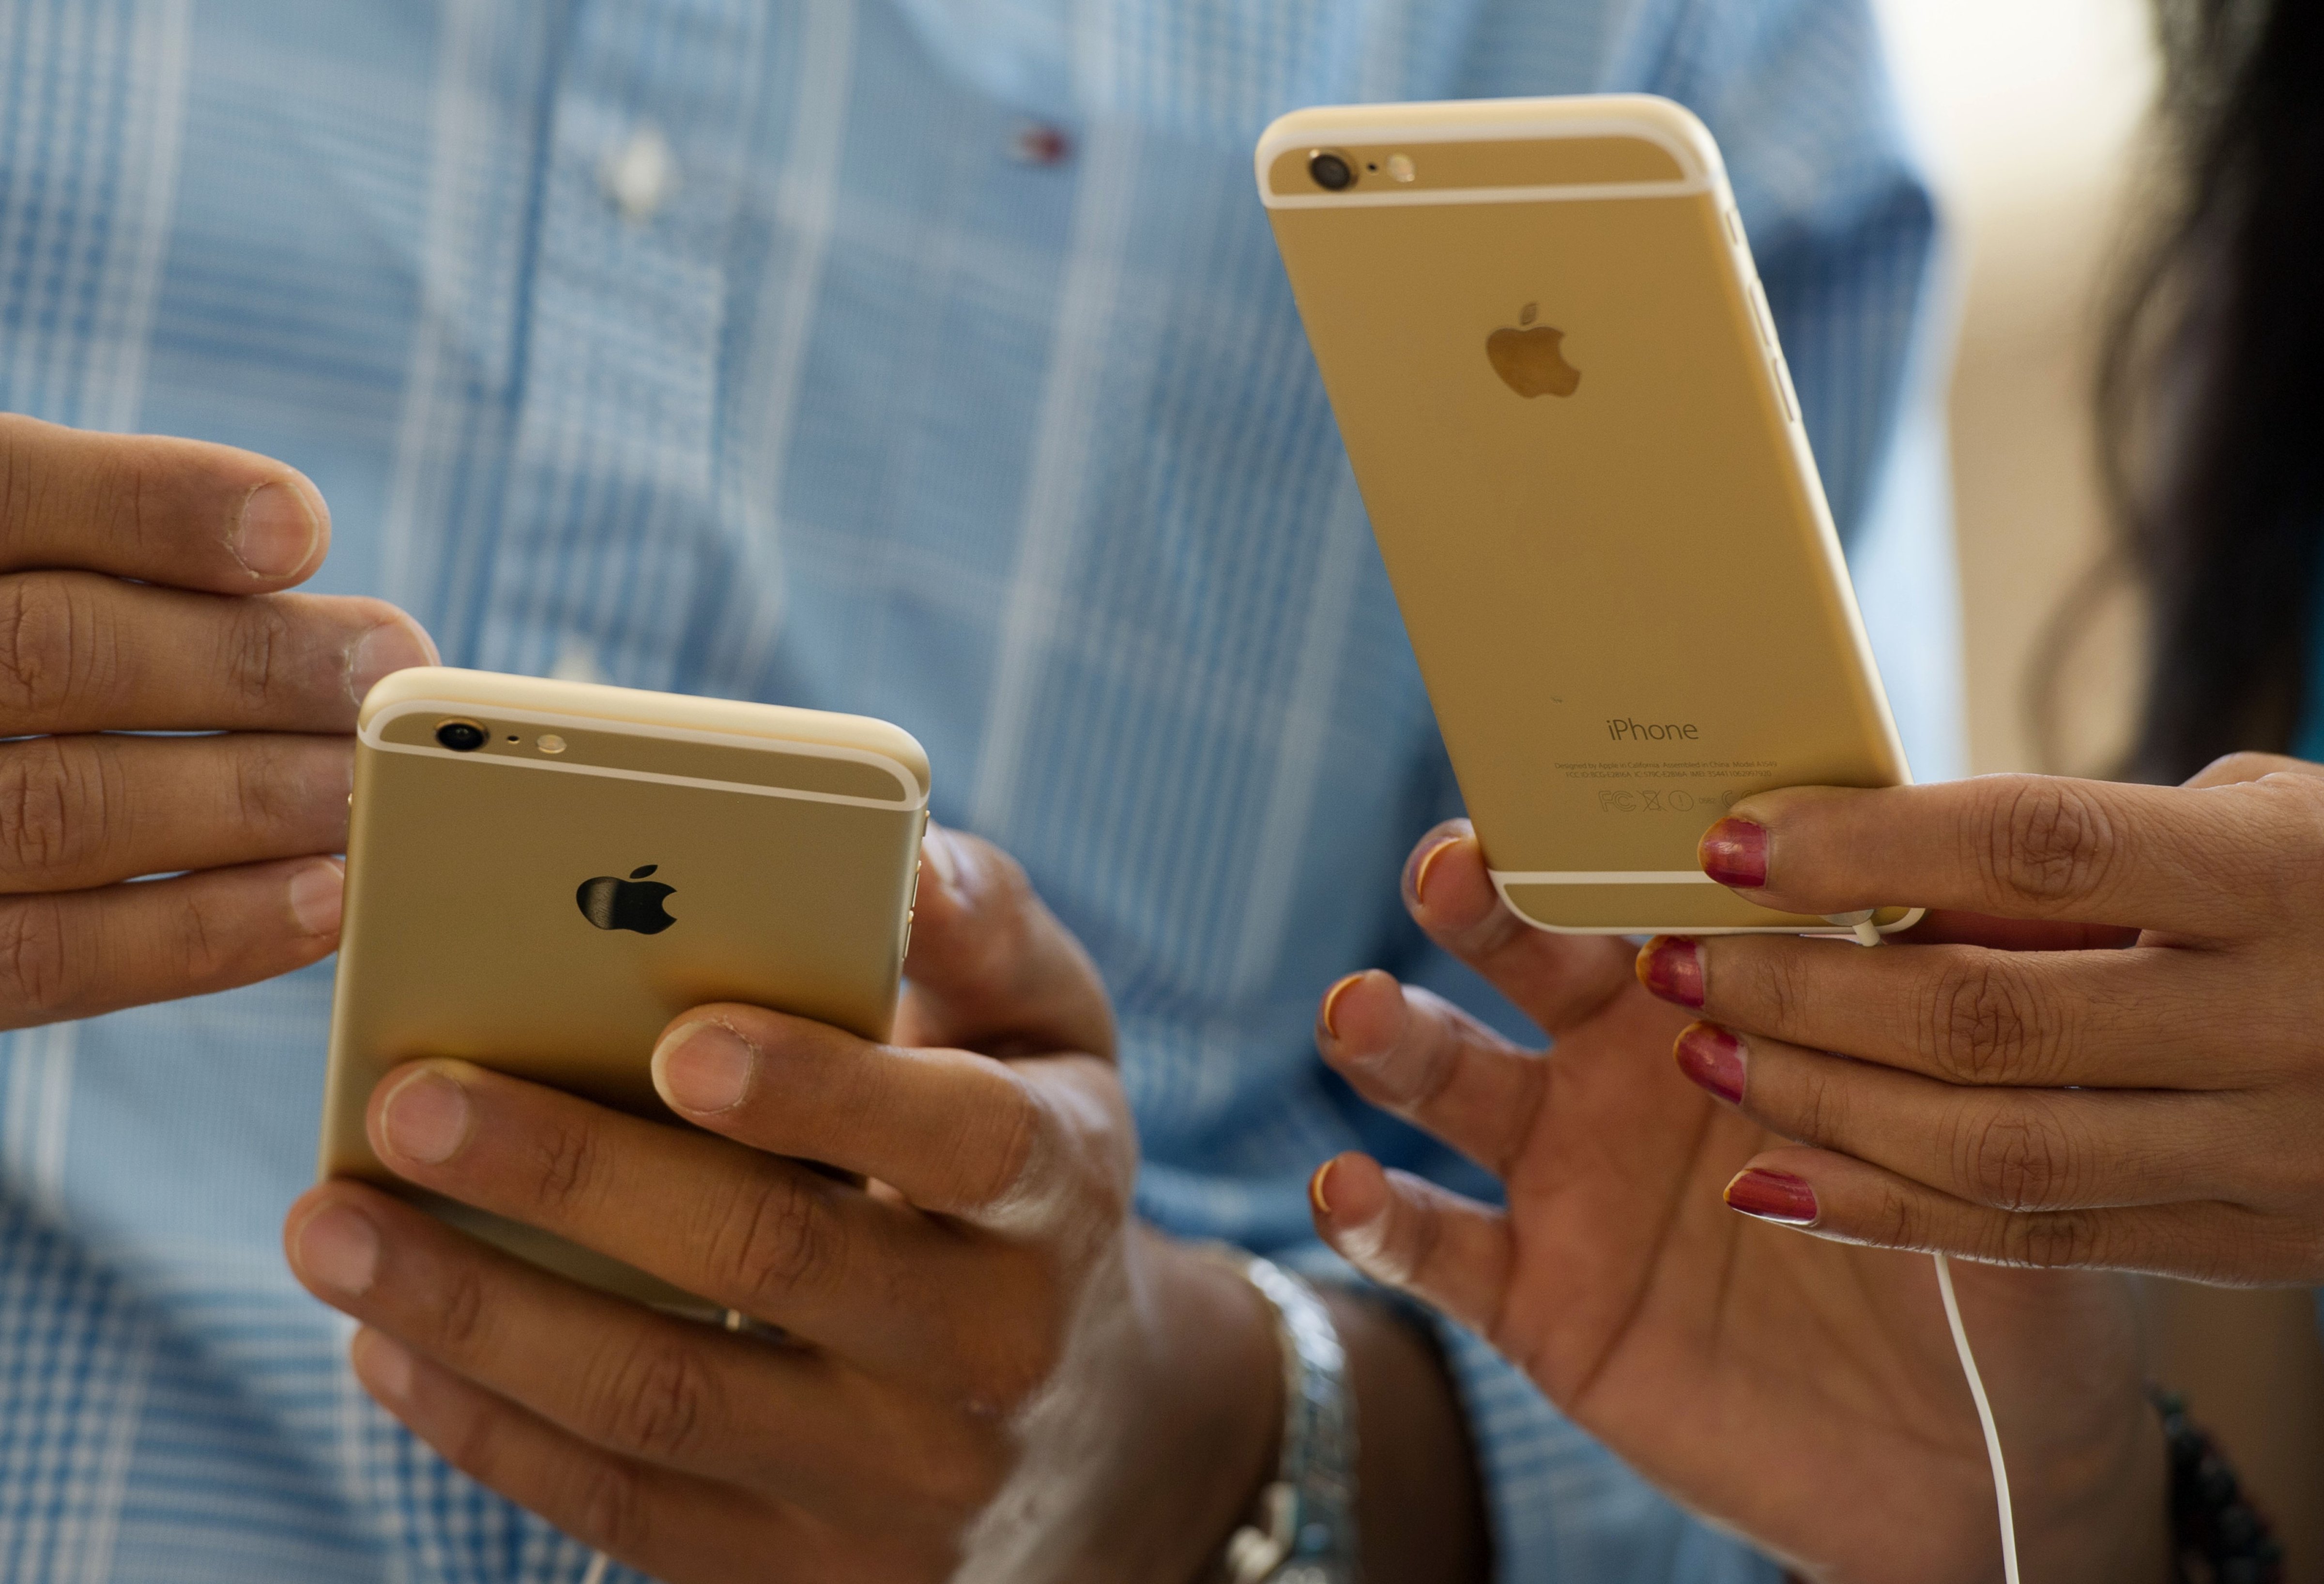 Customers compare an Apple Inc. iPhone 6, left, and iPhone 6 plus during the sales launch at an Apple store in Palo Alto, California, U.S., on Friday, Sept. 19, 2014. (Bloomberg/Getty)